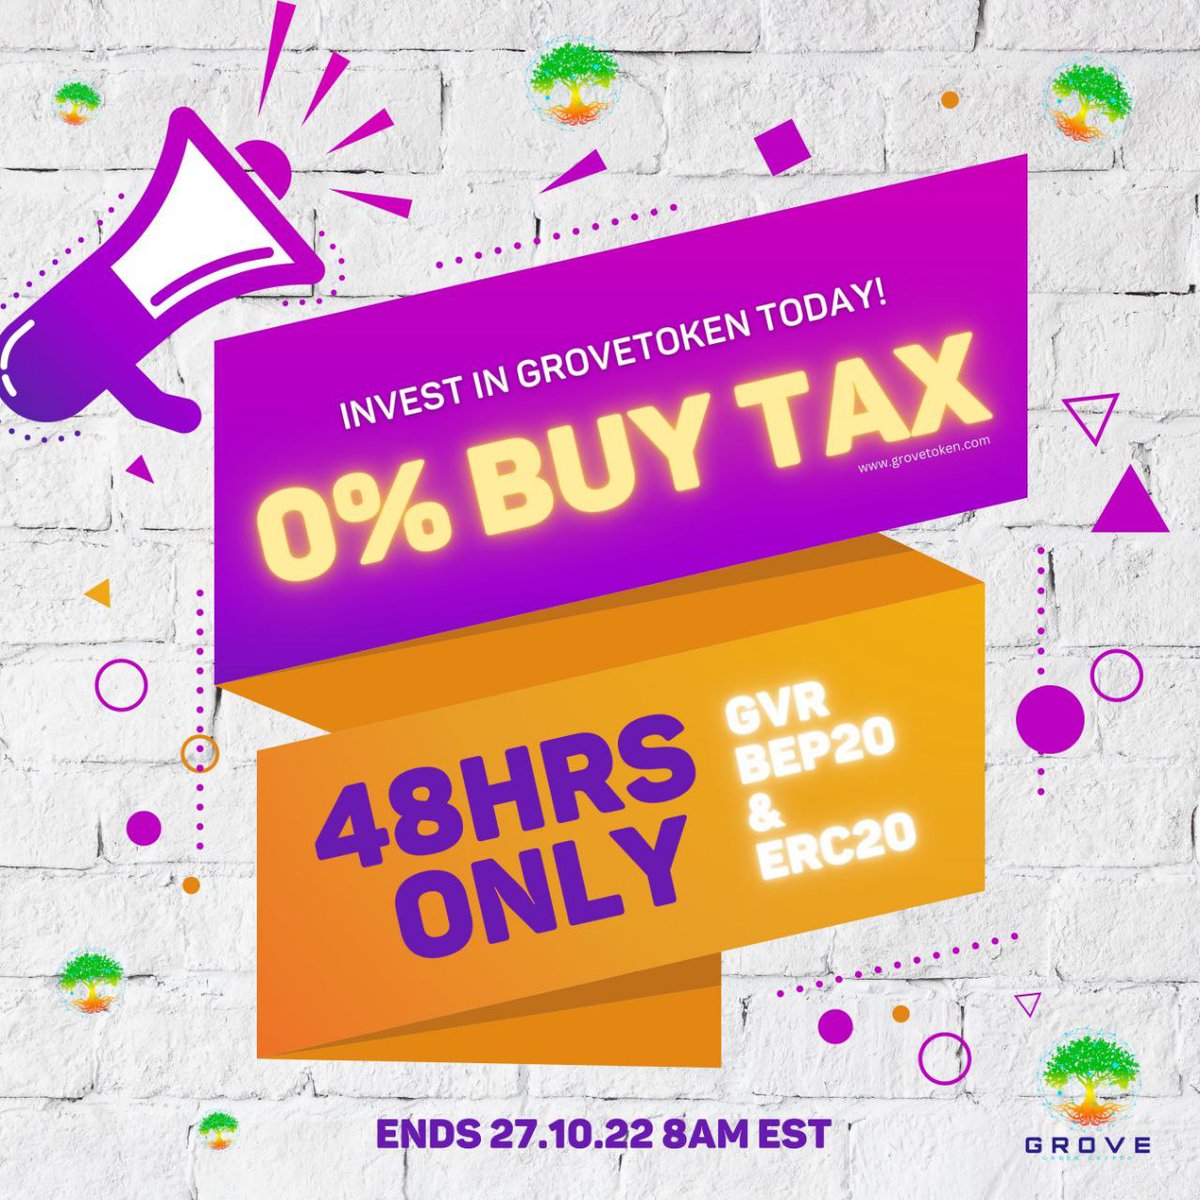 Take advantage of our temporary 0% buy tax! Already, the reflection on the chart is proving to be a massive success! 0% Buy Tax on both BEP-20 and ERC-20 contracts, offer ends 27th October at 8am EST! #GroveToken #GroveGreenArmy #GroveToTop50 #GroveBusiness #Bnb #Ethereum